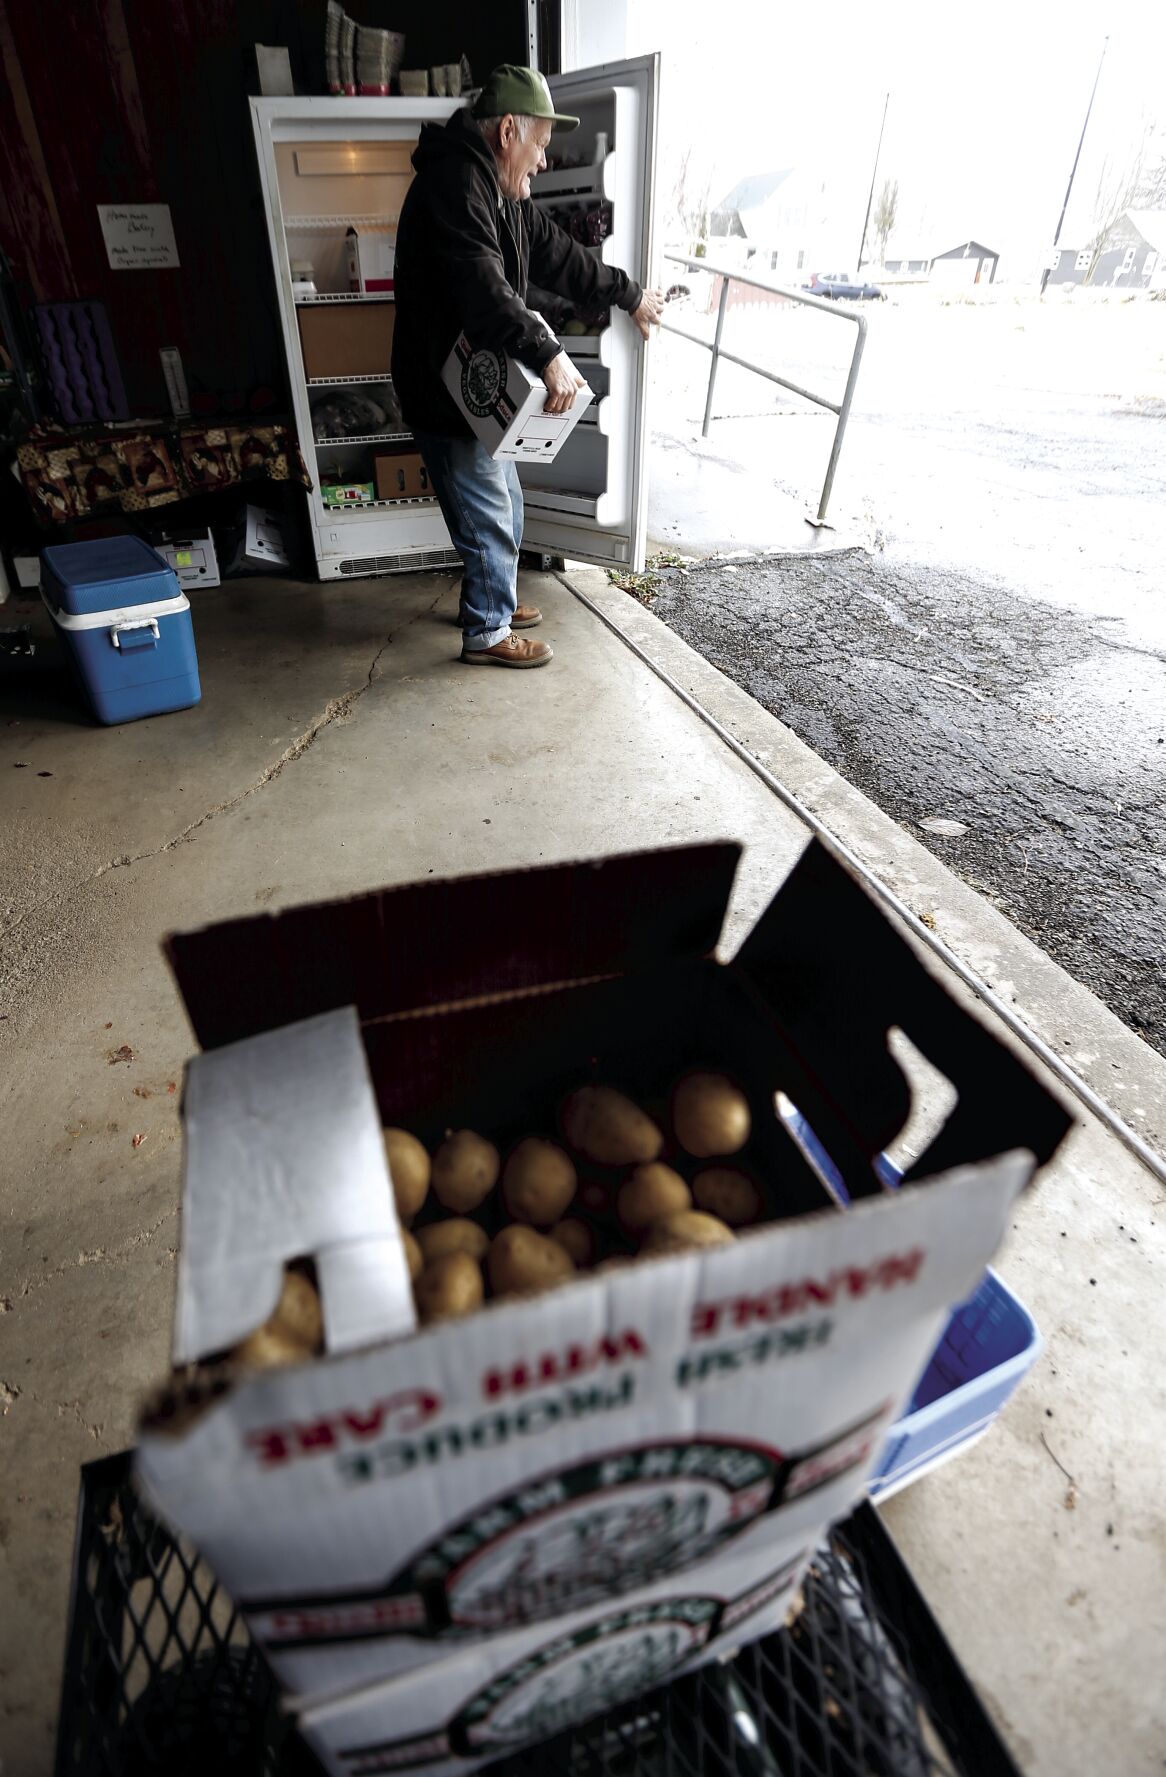 Hammerand grabs a box of potatoes to sort.    PHOTO CREDIT: Dave Kettering
Telegraph Herald